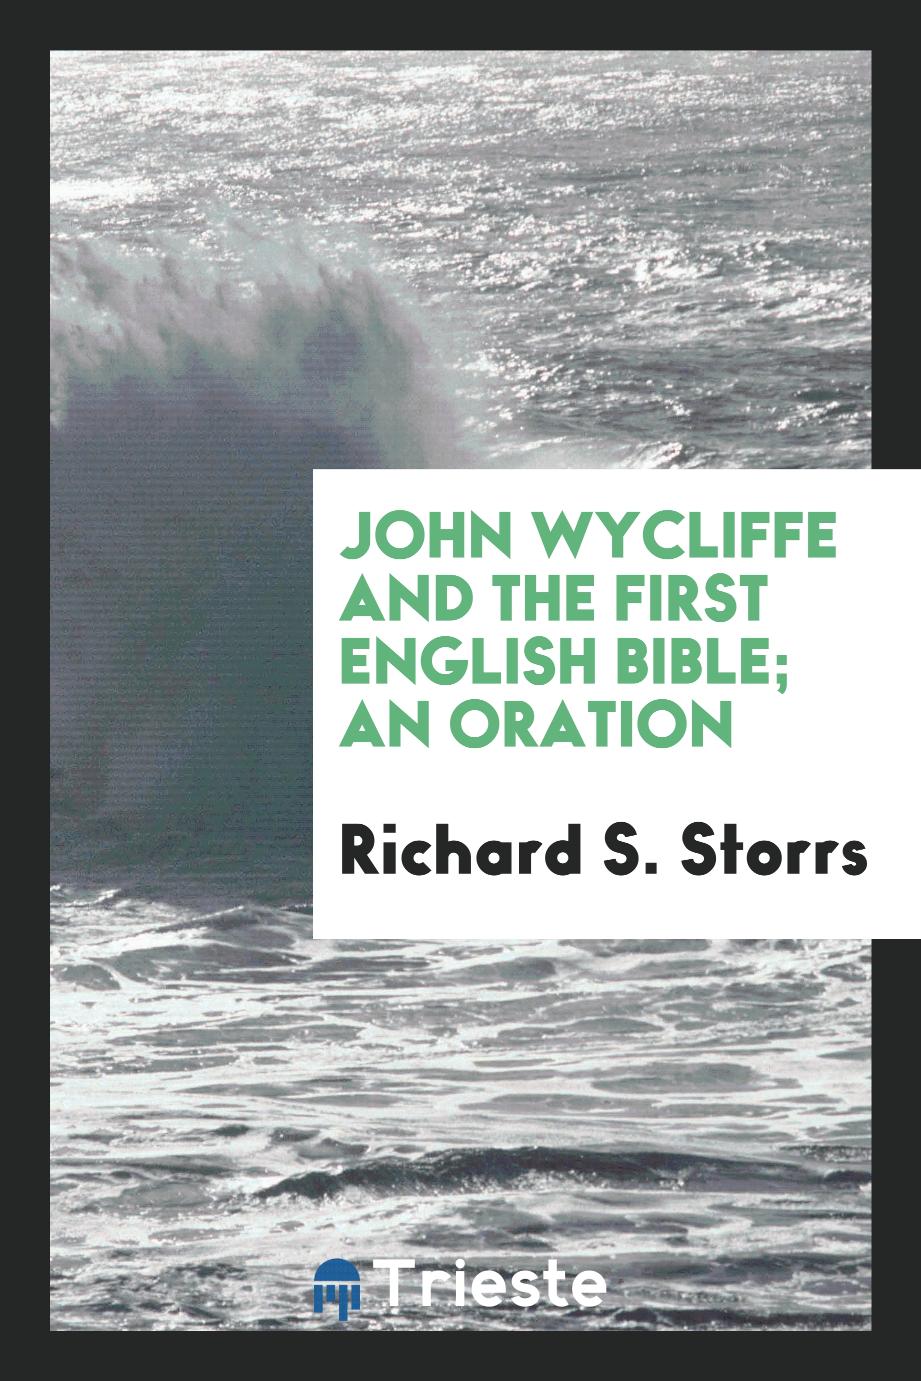 Richard S. Storrs - John Wycliffe and the first English Bible; an oration